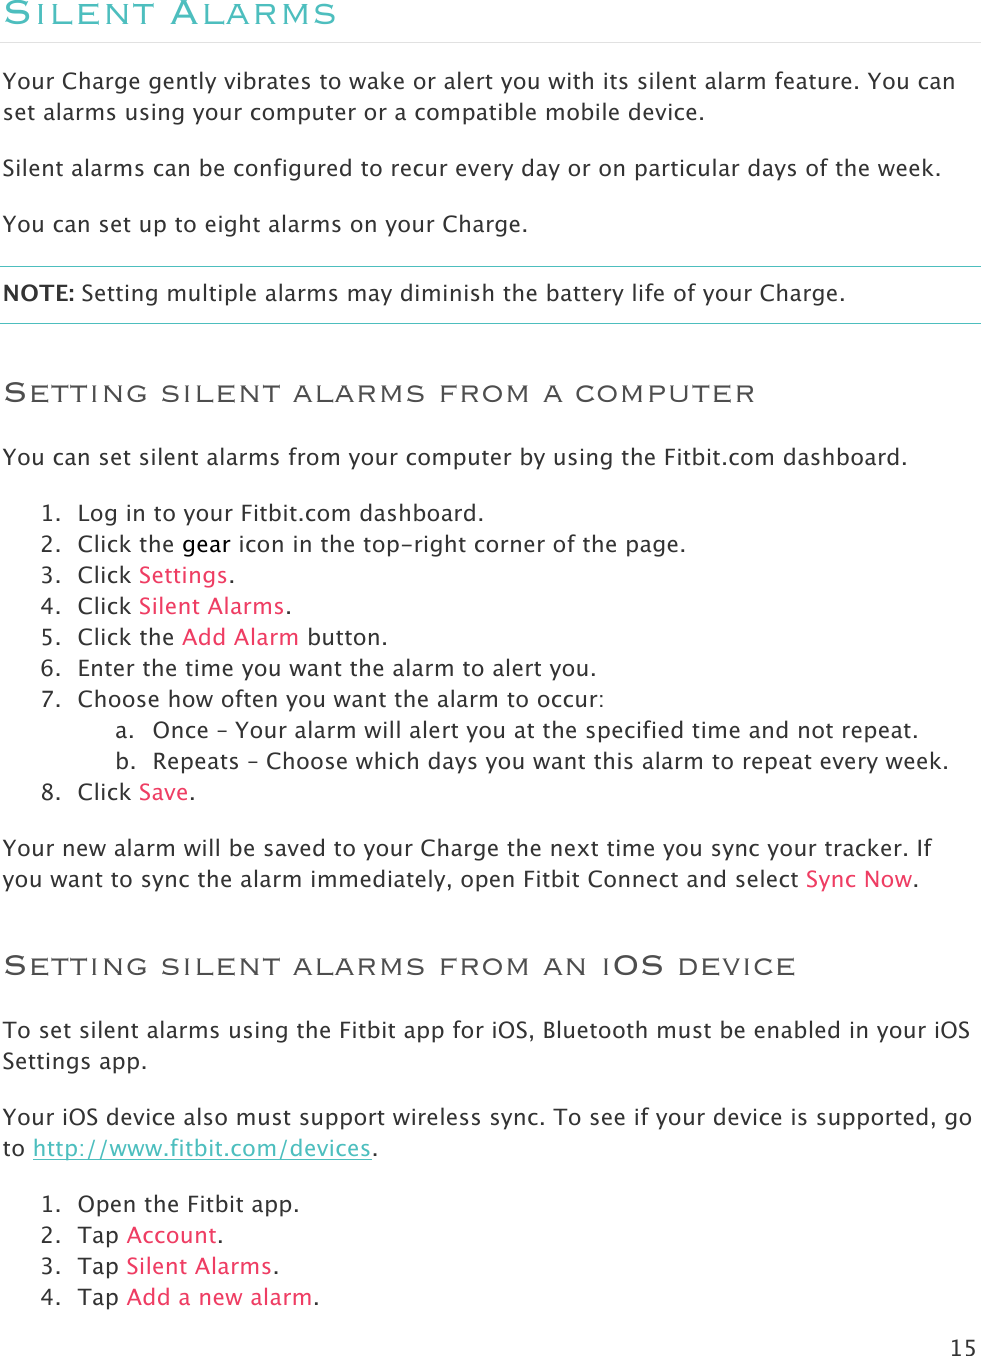 15  Silent Alarms Your Charge gently vibrates to wake or alert you with its silent alarm feature. You can set alarms using your computer or a compatible mobile device.  Silent alarms can be configured to recur every day or on particular days of the week. You can set up to eight alarms on your Charge.  NOTE: Setting multiple alarms may diminish the battery life of your Charge.  Setting silent alarms from a computer You can set silent alarms from your computer by using the Fitbit.com dashboard.  1. Log in to your Fitbit.com dashboard.  2. Click the gear icon in the top-right corner of the page.  3. Click Settings. 4. Click Silent Alarms. 5. Click the Add Alarm button.   6. Enter the time you want the alarm to alert you. 7. Choose how often you want the alarm to occur: a. Once – Your alarm will alert you at the specified time and not repeat. b. Repeats – Choose which days you want this alarm to repeat every week. 8. Click Save. Your new alarm will be saved to your Charge the next time you sync your tracker. If you want to sync the alarm immediately, open Fitbit Connect and select Sync Now. Setting silent alarms from an iOS device To set silent alarms using the Fitbit app for iOS, Bluetooth must be enabled in your iOS Settings app. Your iOS device also must support wireless sync. To see if your device is supported, go to http://www.fitbit.com/devices.  1. Open the Fitbit app. 2. Tap Account.  3. Tap Silent Alarms. 4. Tap Add a new alarm.  